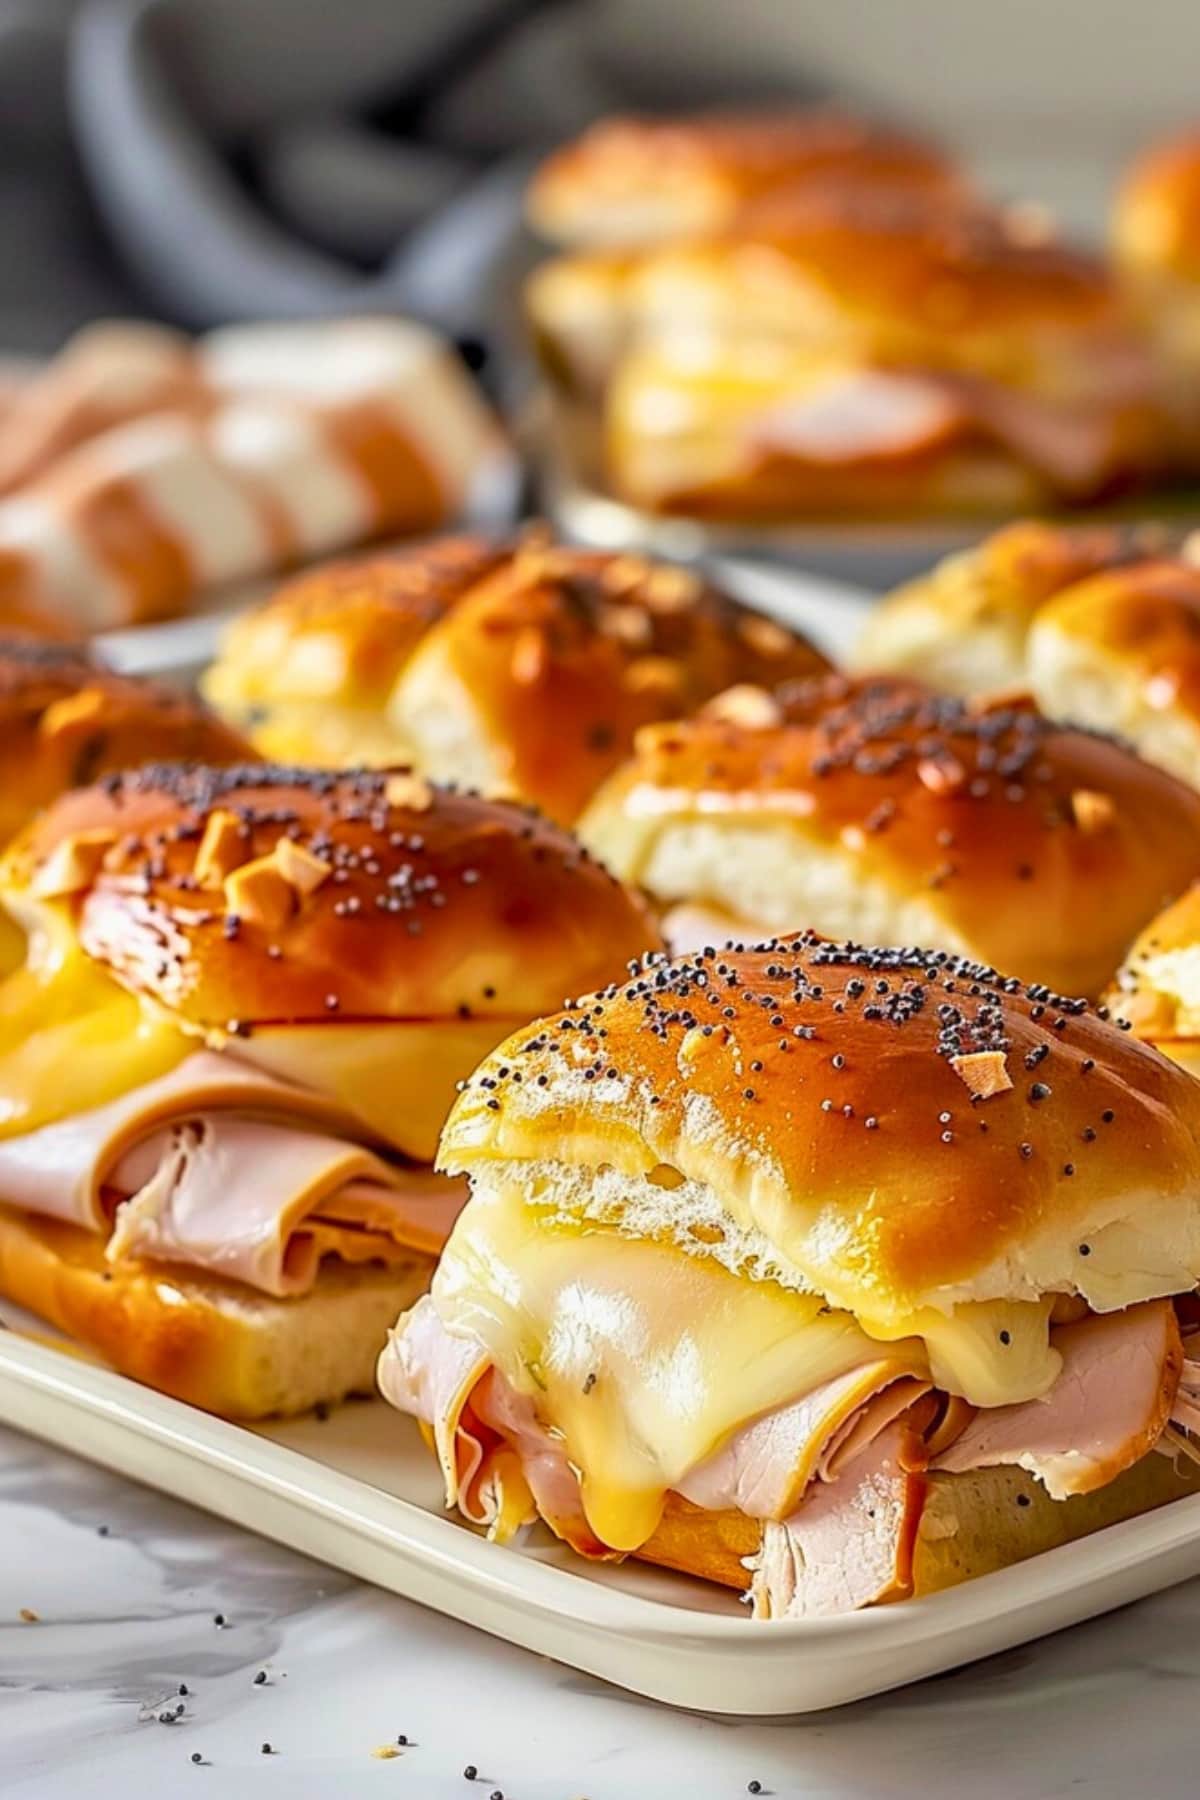 Turkey and cheese sliders on a tray.